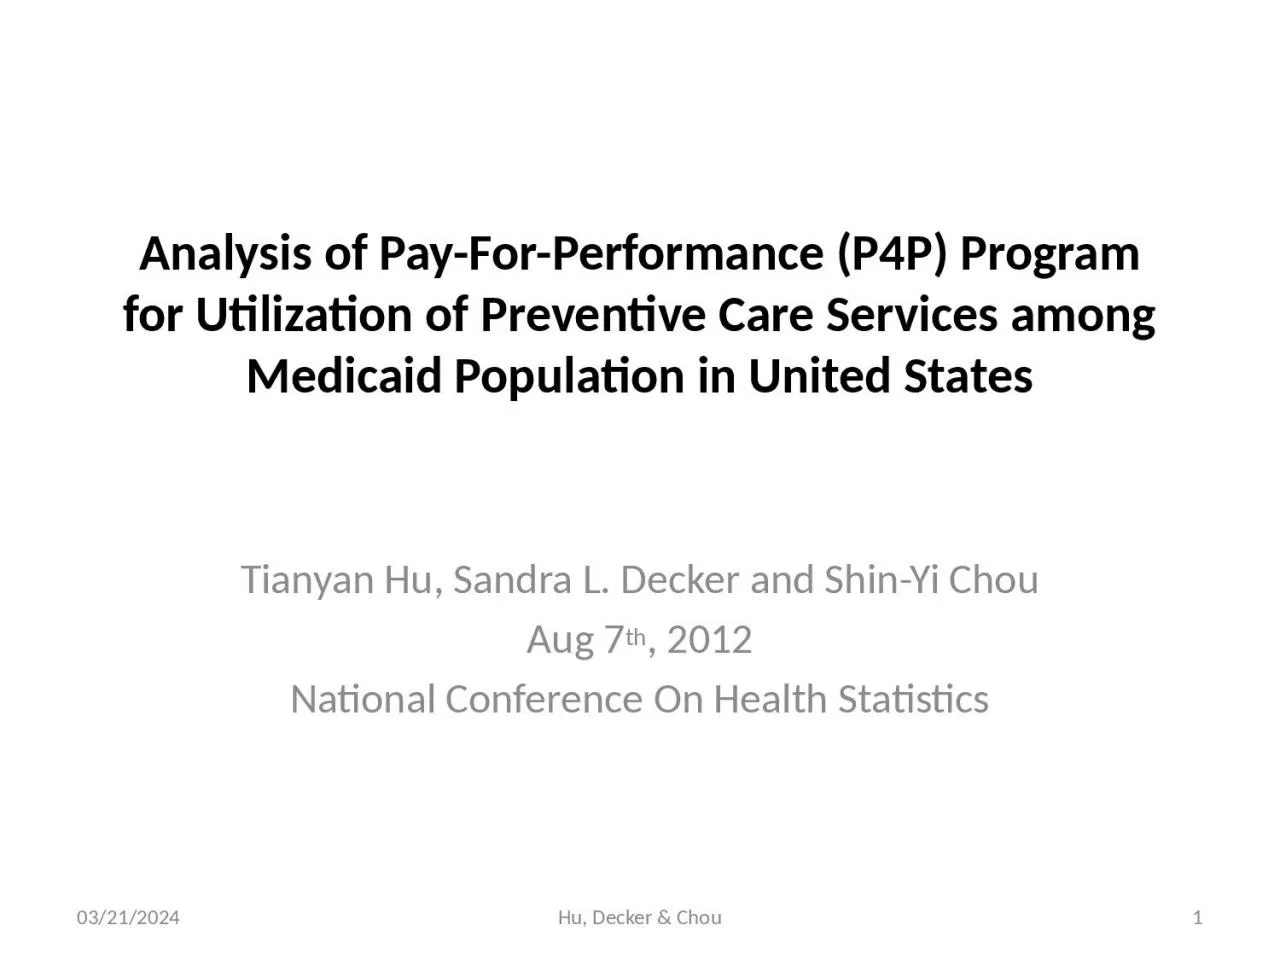 Analysis of Pay-For-Performance (P4P) Program for Utilization of Preventive Care Services